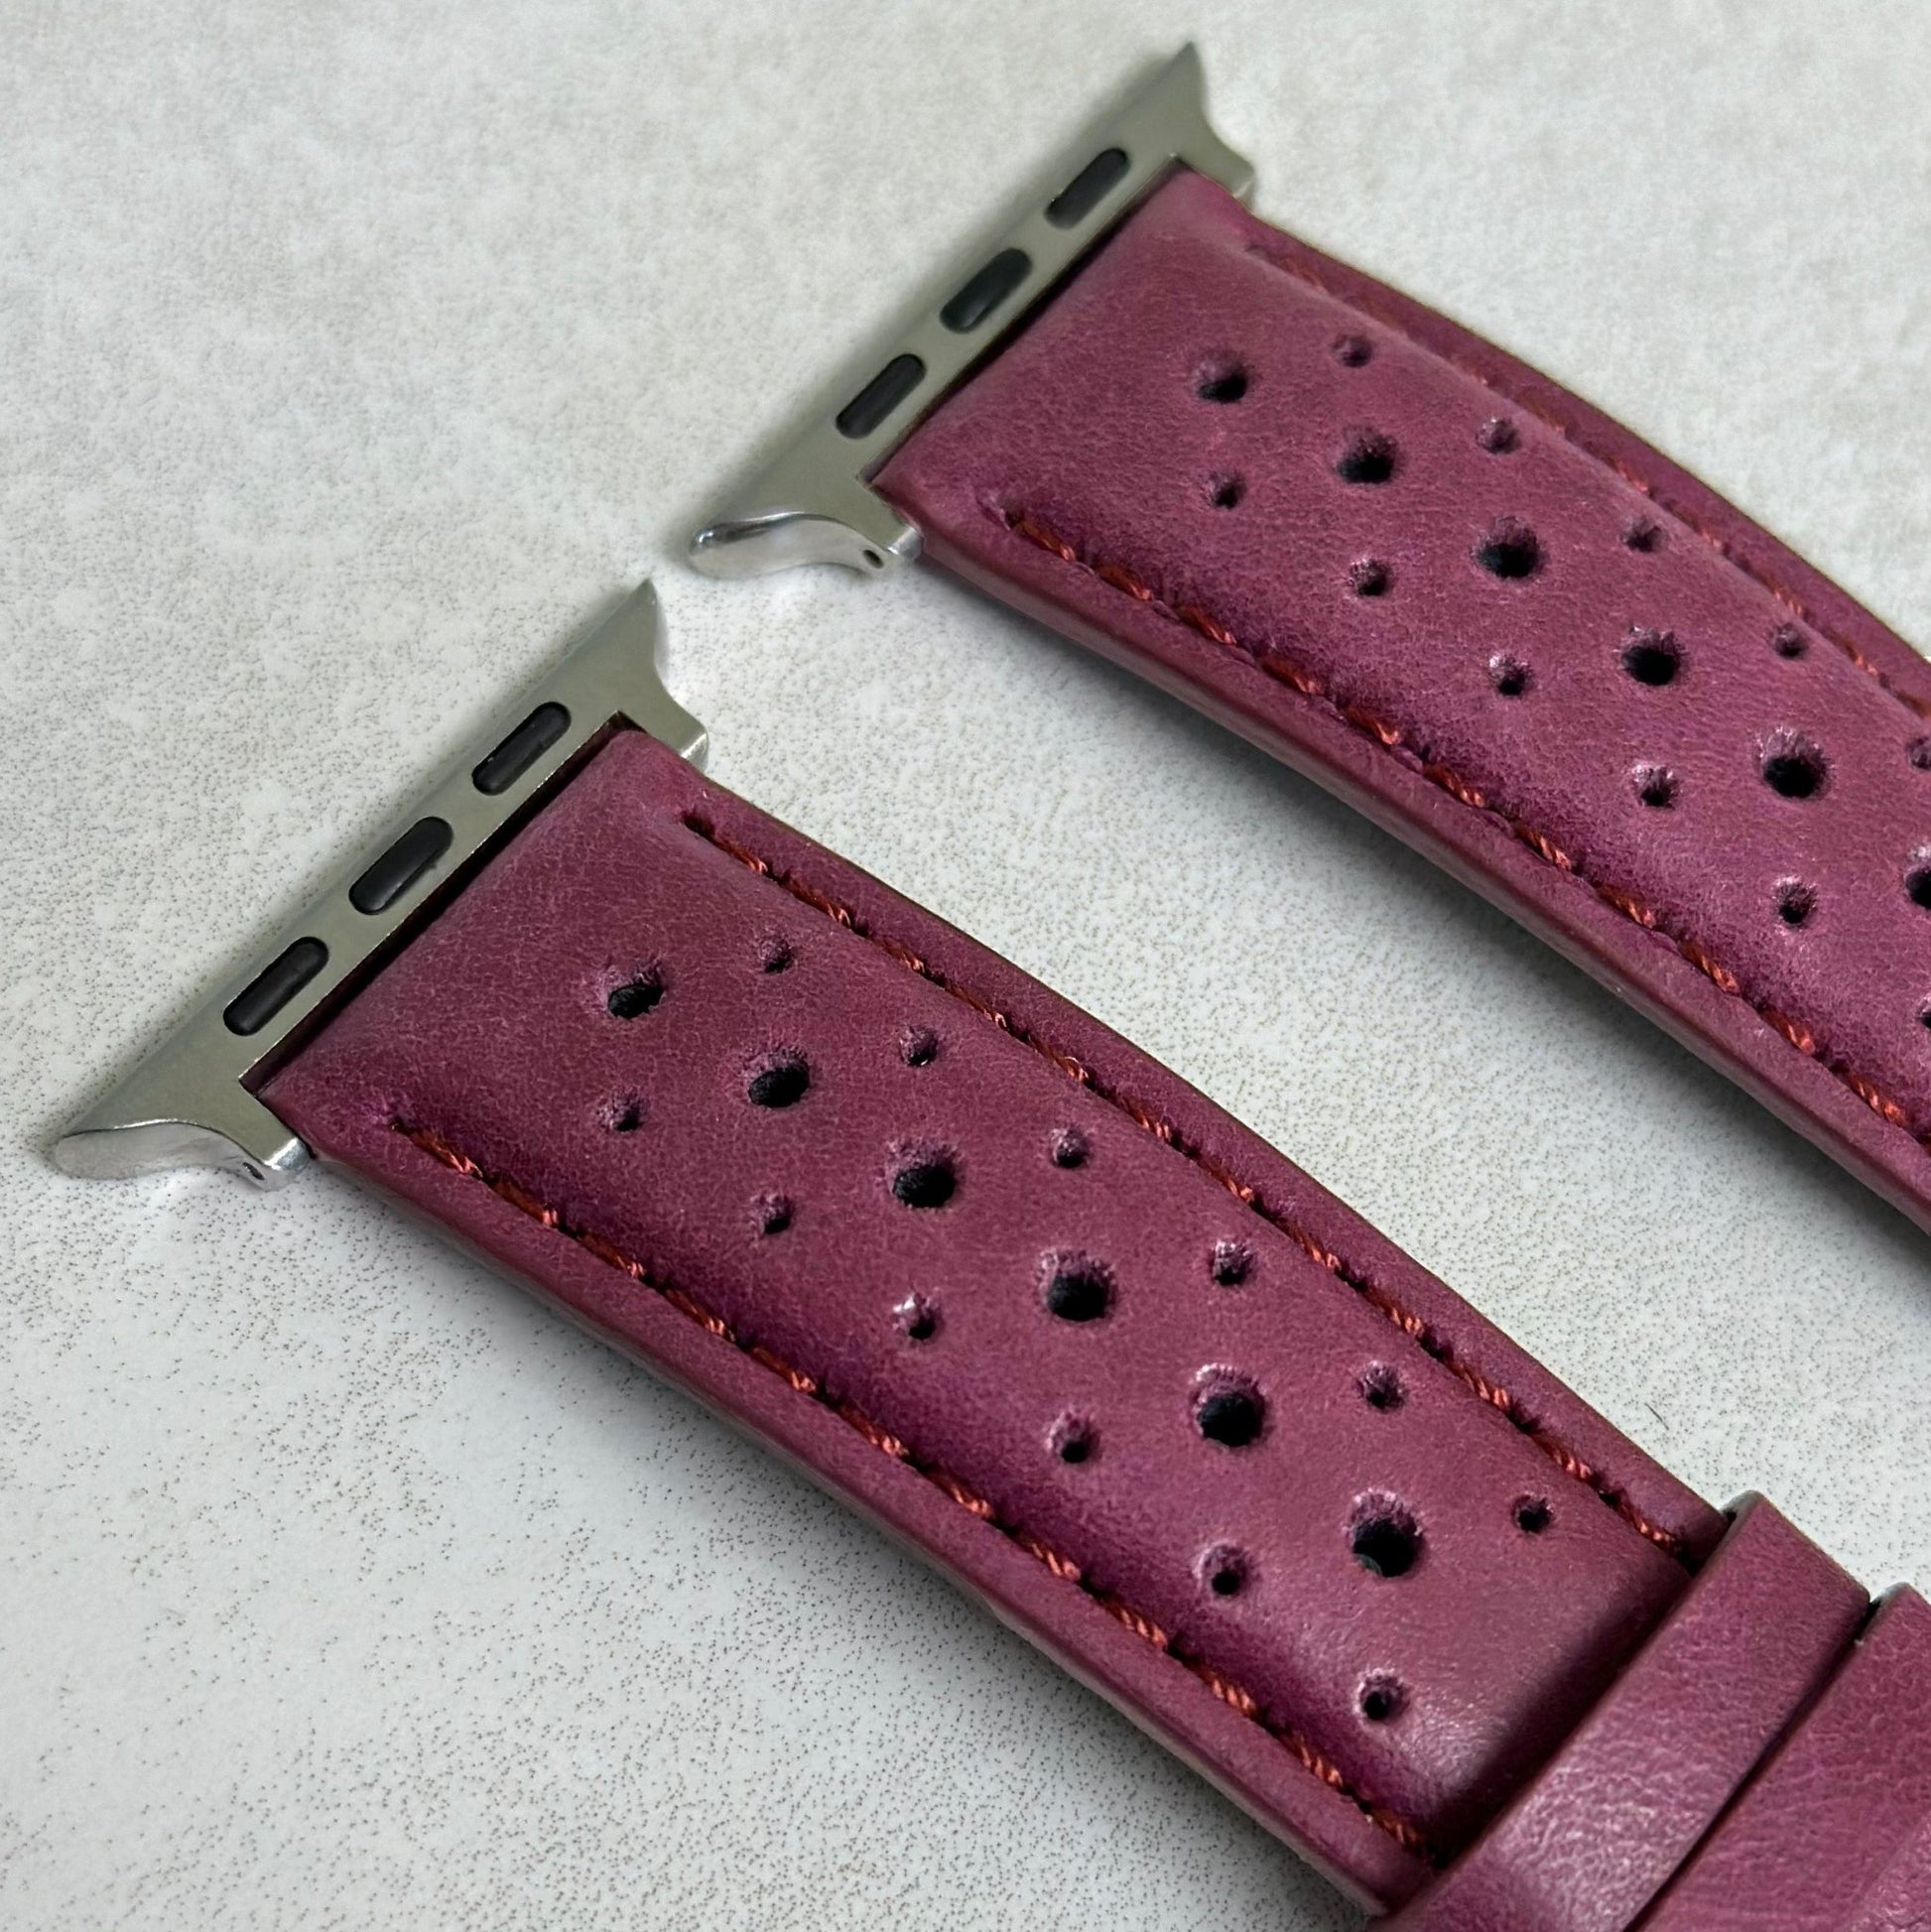 Top of the Montecarlo purple vintage rally Apple Watch strap. Perforated leather. 316L stainless steel Apple Watch connectors